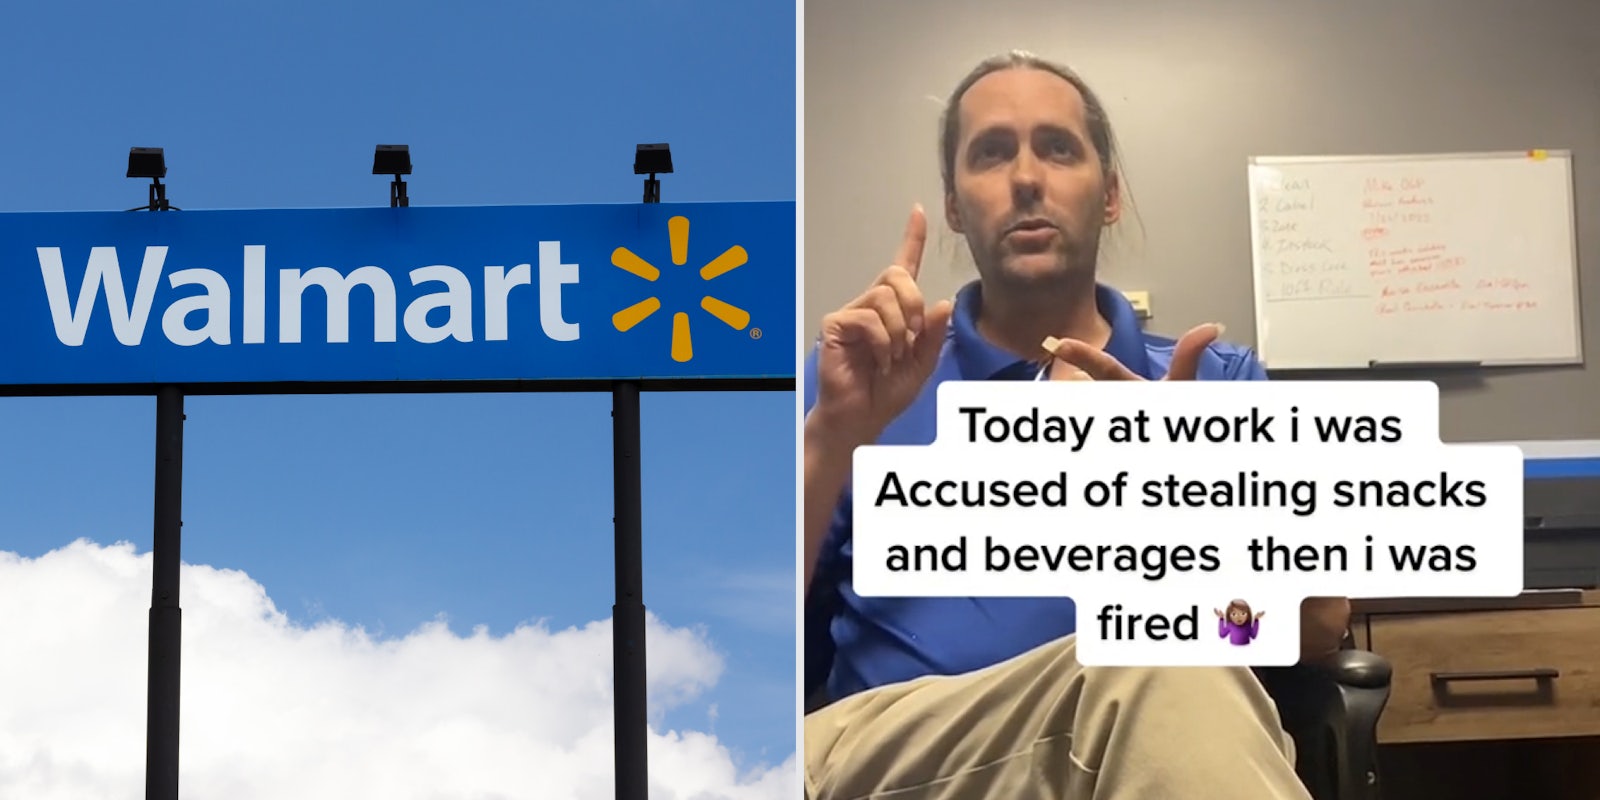 Walmart shutterstock image (l) Walmart manager pointing fingers caption ' Today at work i was accused of stealing snacks and beverages and then i was fired'